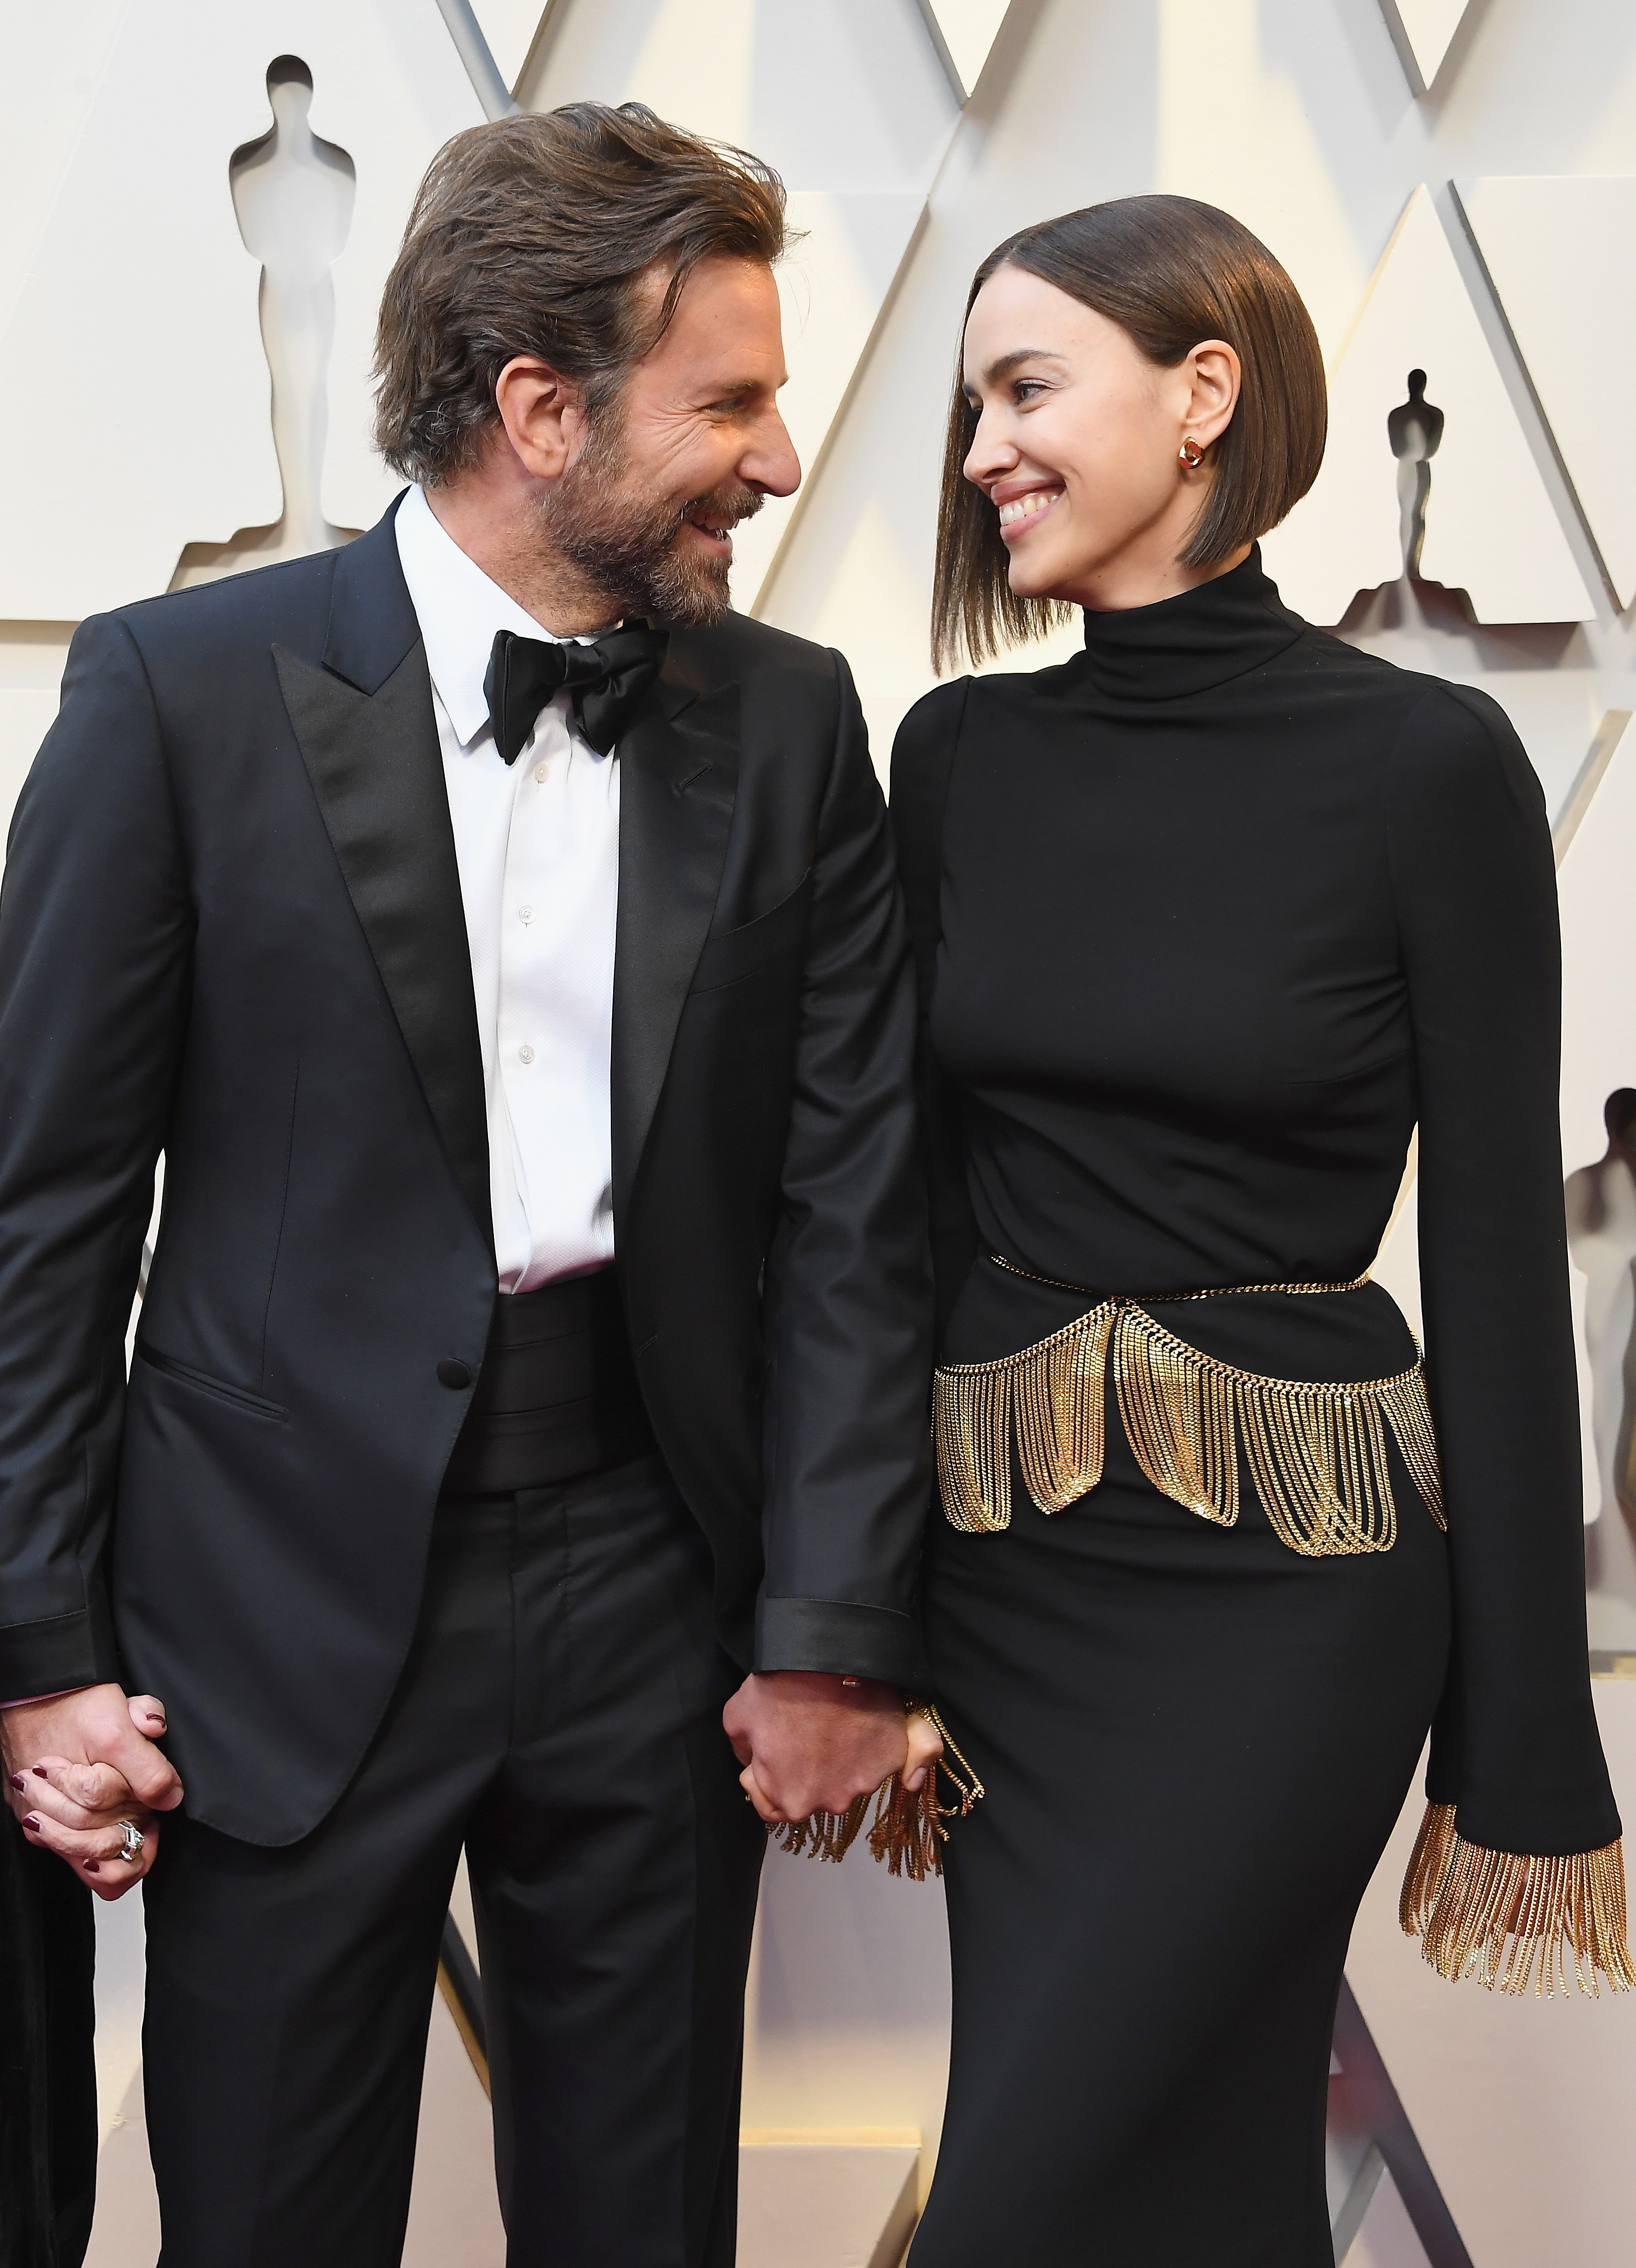 Bradley Cooper and Irina Shayk at the 91st Annual Academy Awards in Hollywood, California on February 24, 2019 | Source: Getty Images